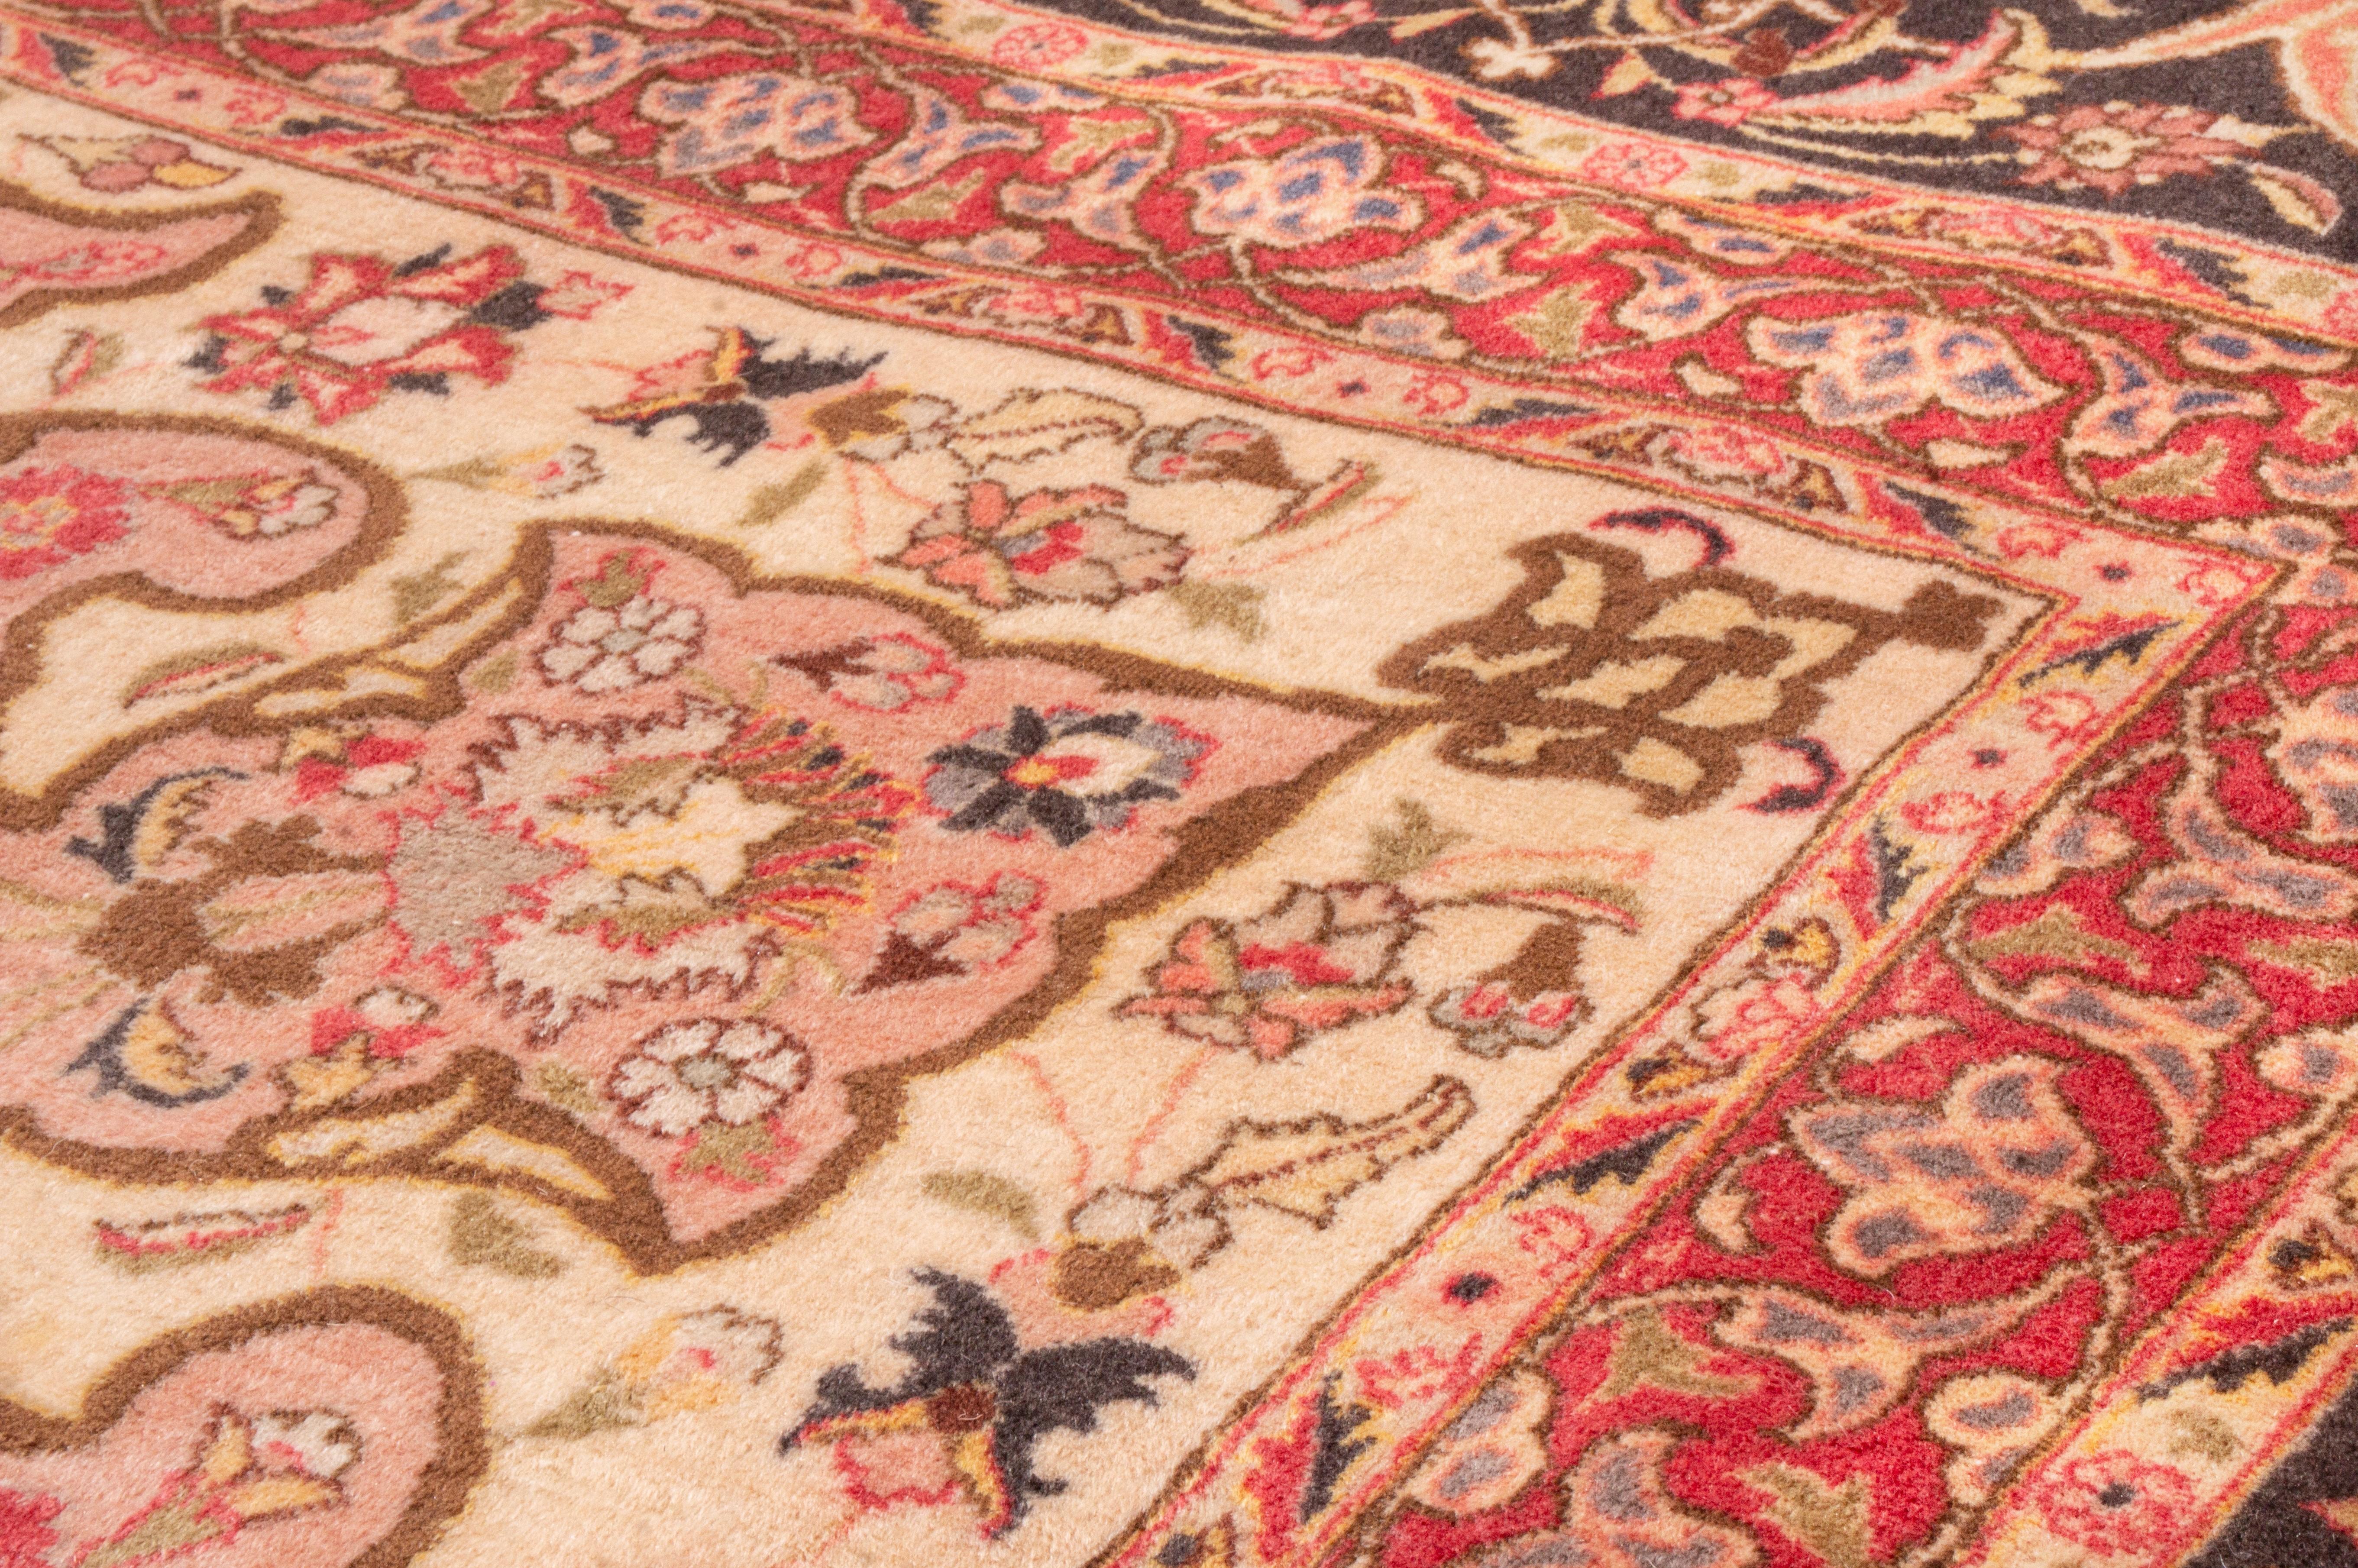 Hand-Knotted Antique Tabriz Medallion-Style Pink Wool Rug with Floral Patterns For Sale